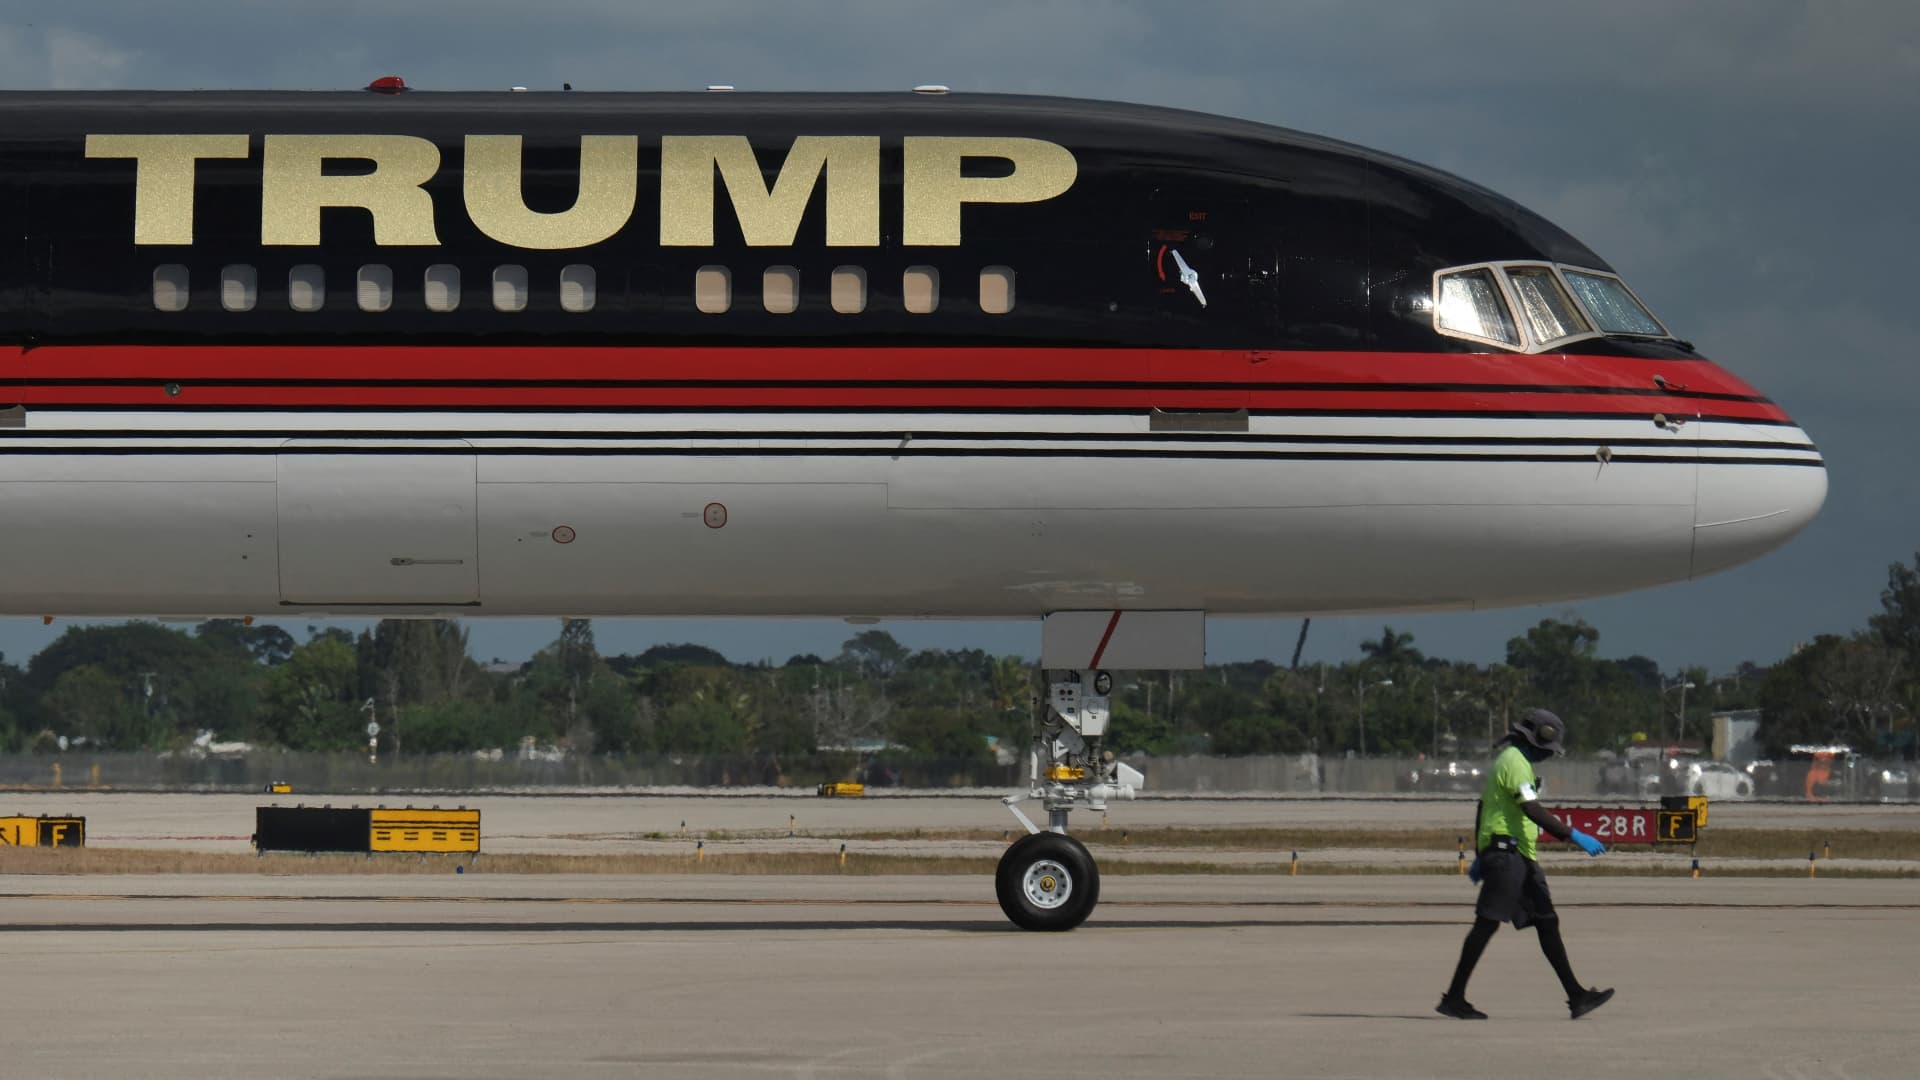 A ground crew member walks past the plane of former U.S. President Donald Trump parked at the Palm Beach International Airport, in West Palm Beach, Florida, U.S. March 27, 2023.